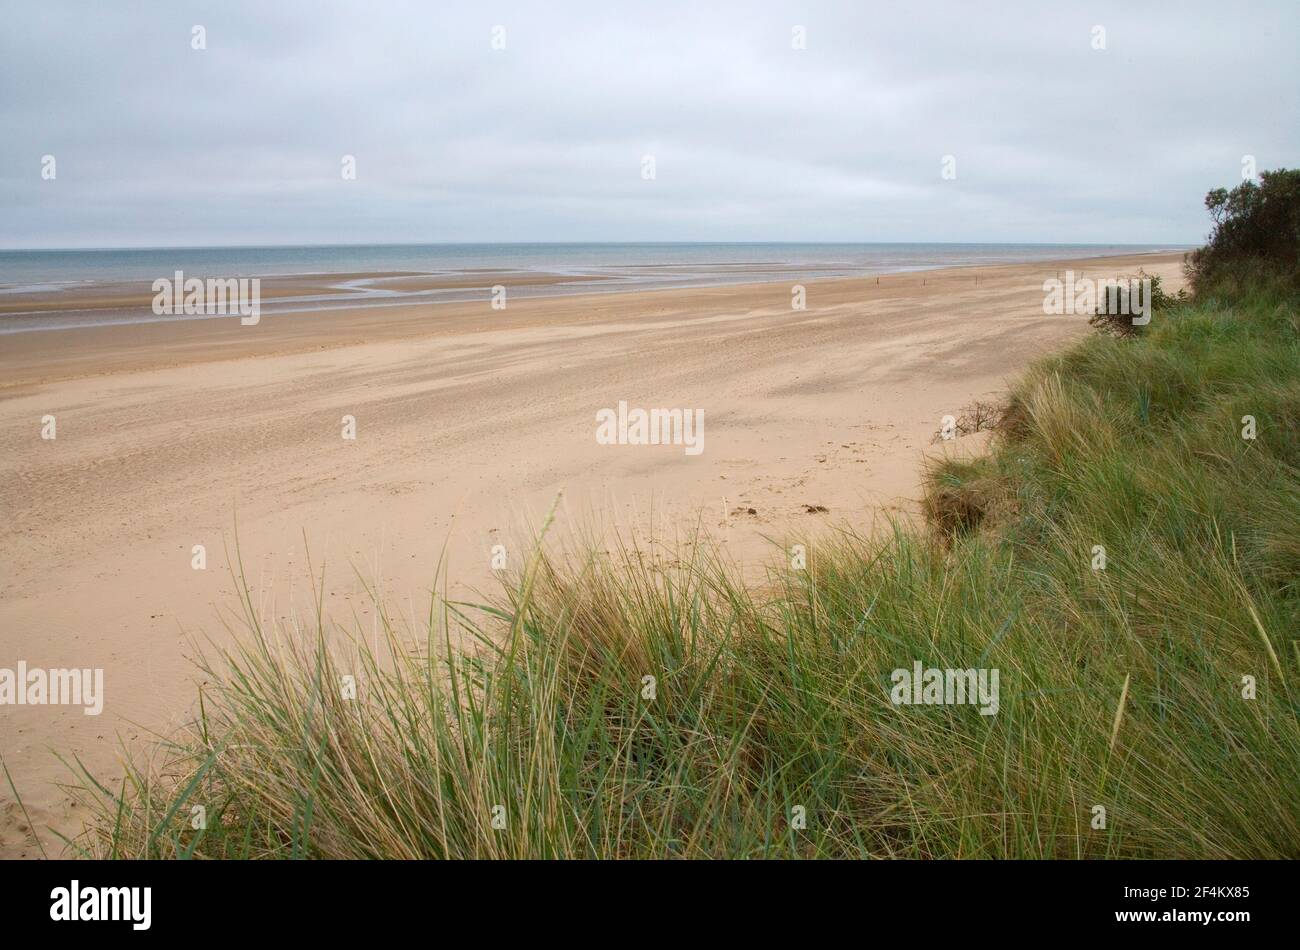 the large beach at gibraltar point on the lincolnshire coast Stock Photo